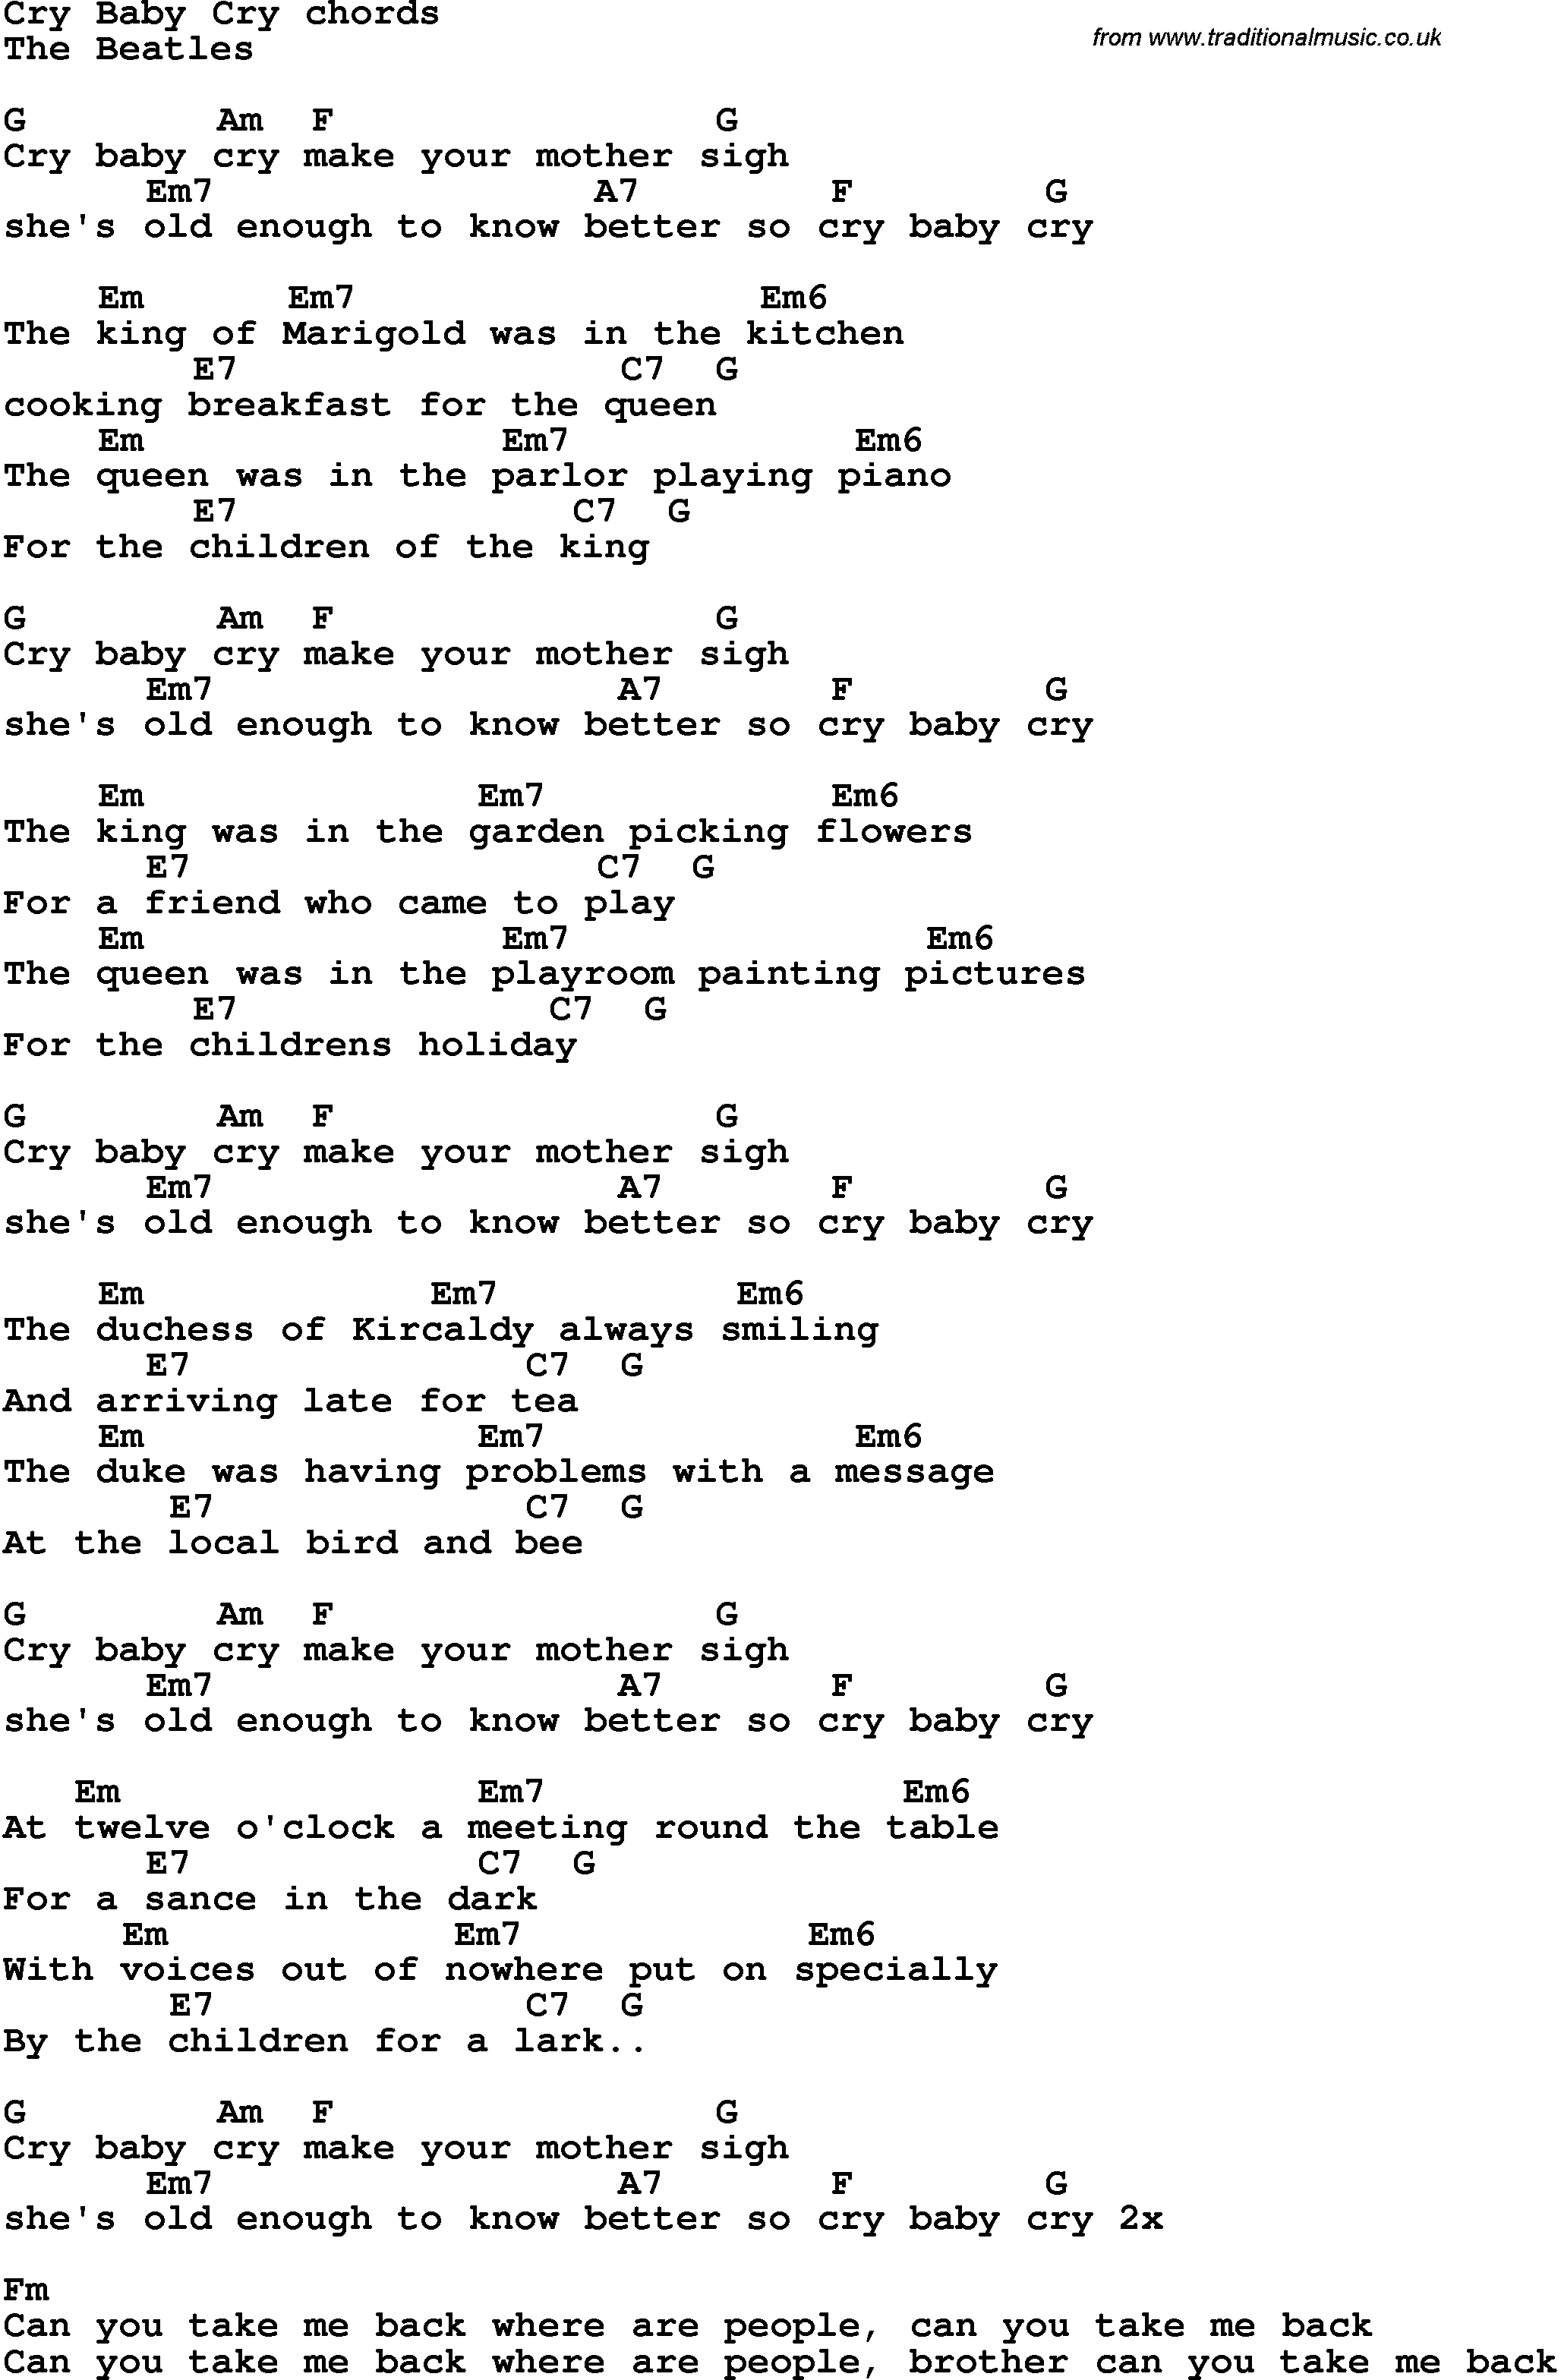 Song Lyrics with guitar chords for Cry Baby Cry - The Beatles